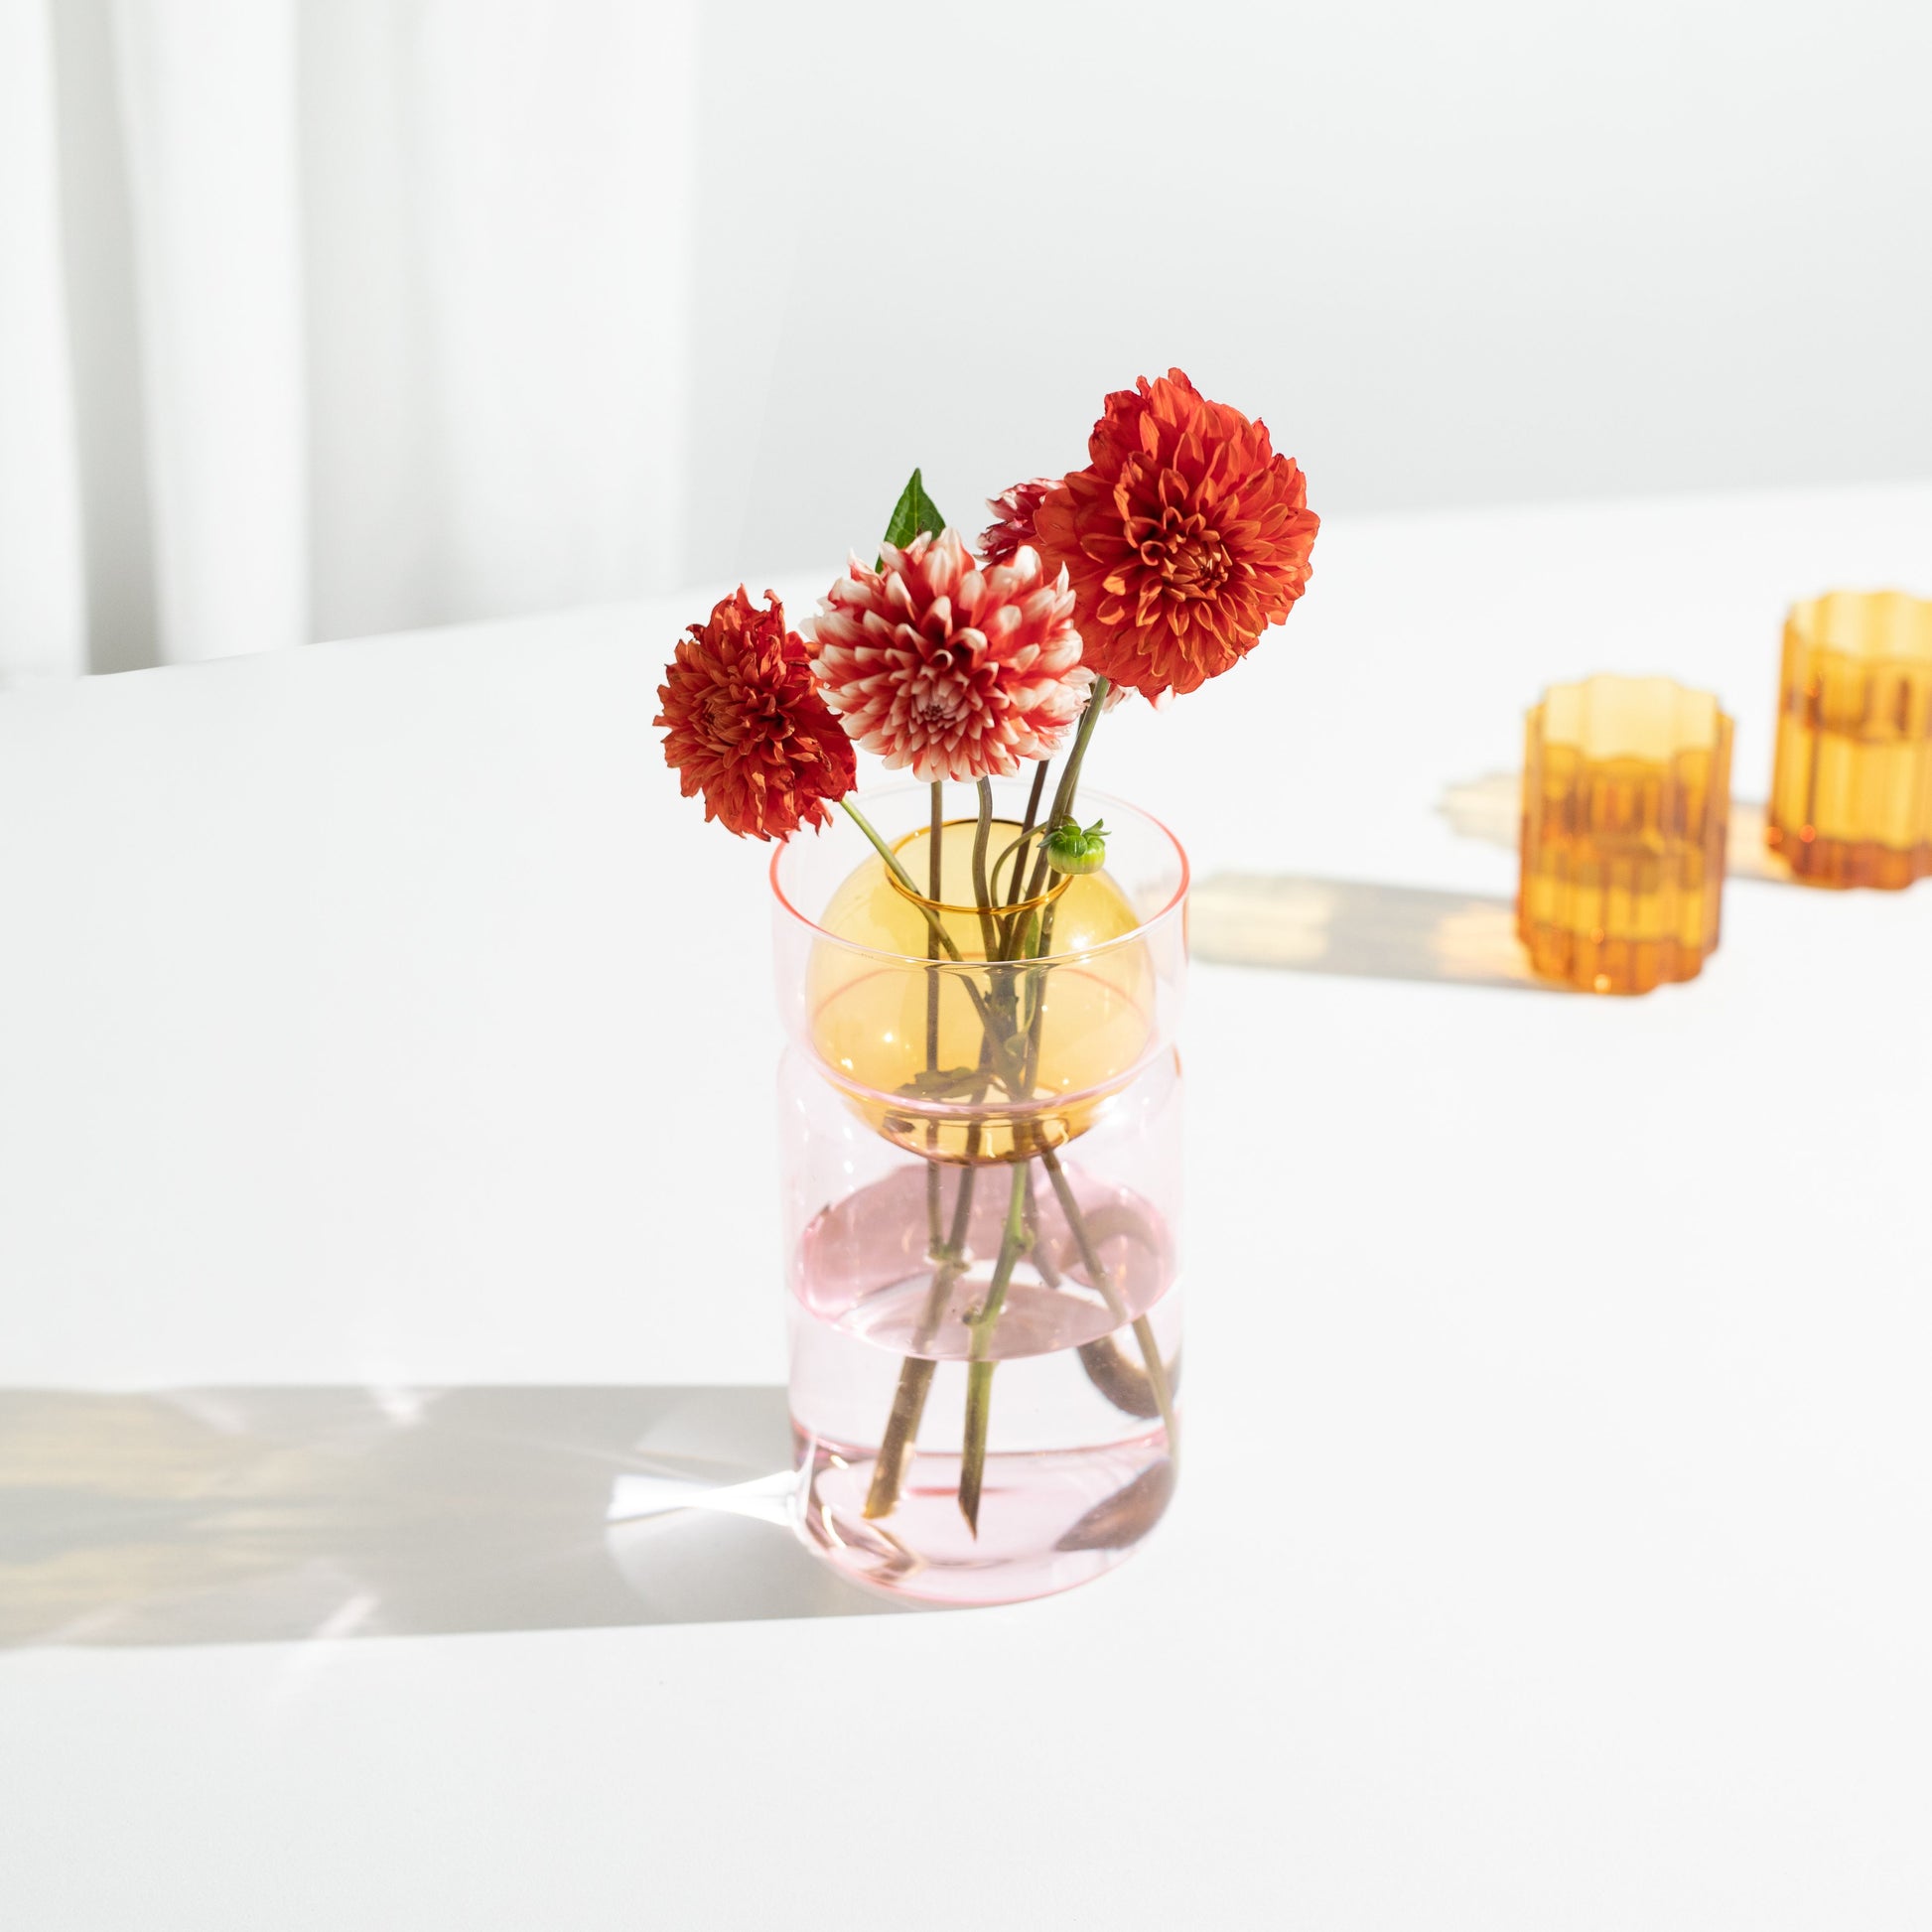 These playful cylindrical vases feature an internal sphere with two hand-cut holes ready to be filled with freshly picked flowers and foliage or to grace any space as a decorative sculptural piece.